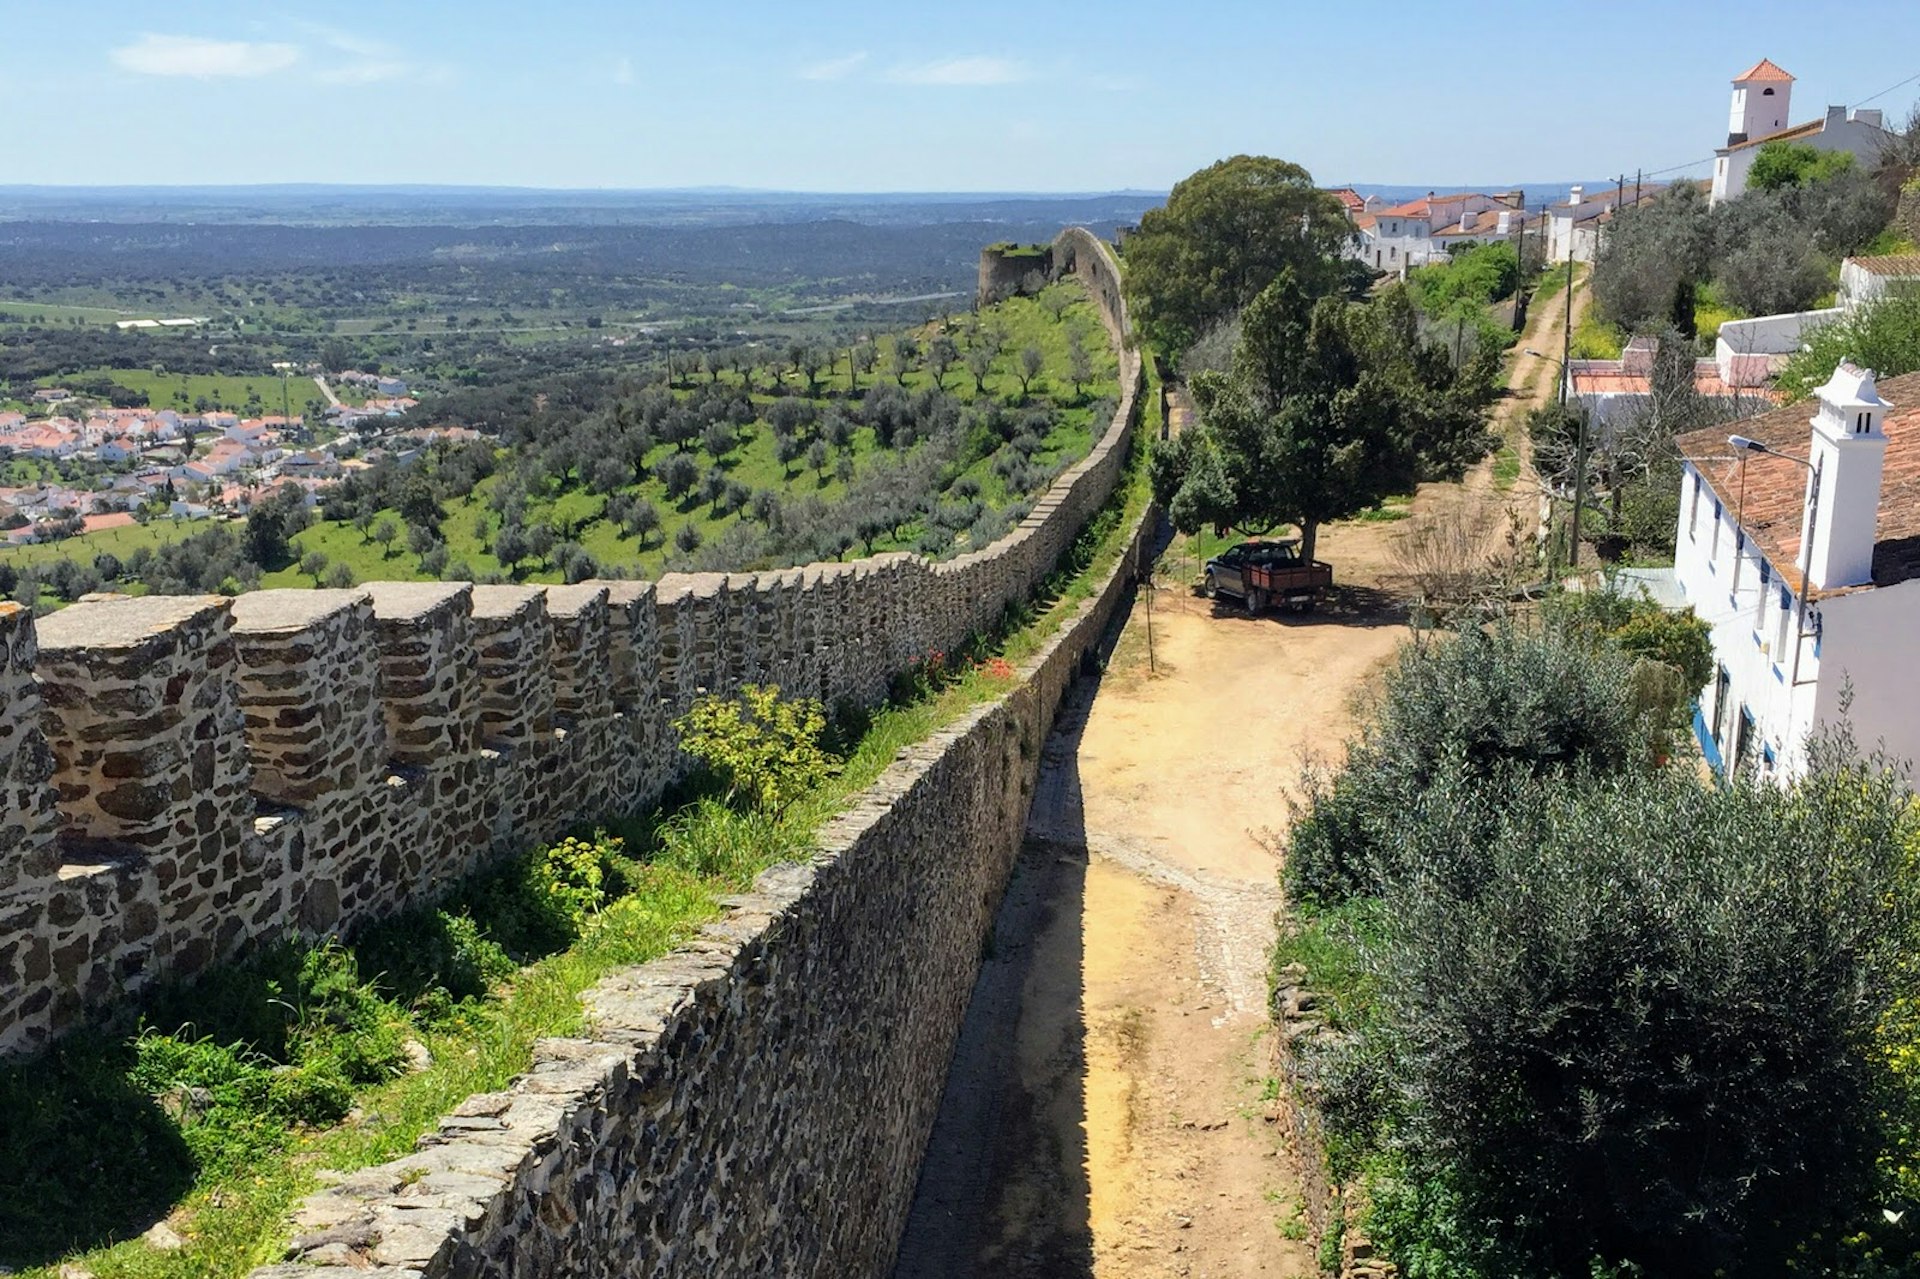 Places like Évoramonte are surrounded by olive groves and vineyards © Regis St. Louis / Lonely Planet